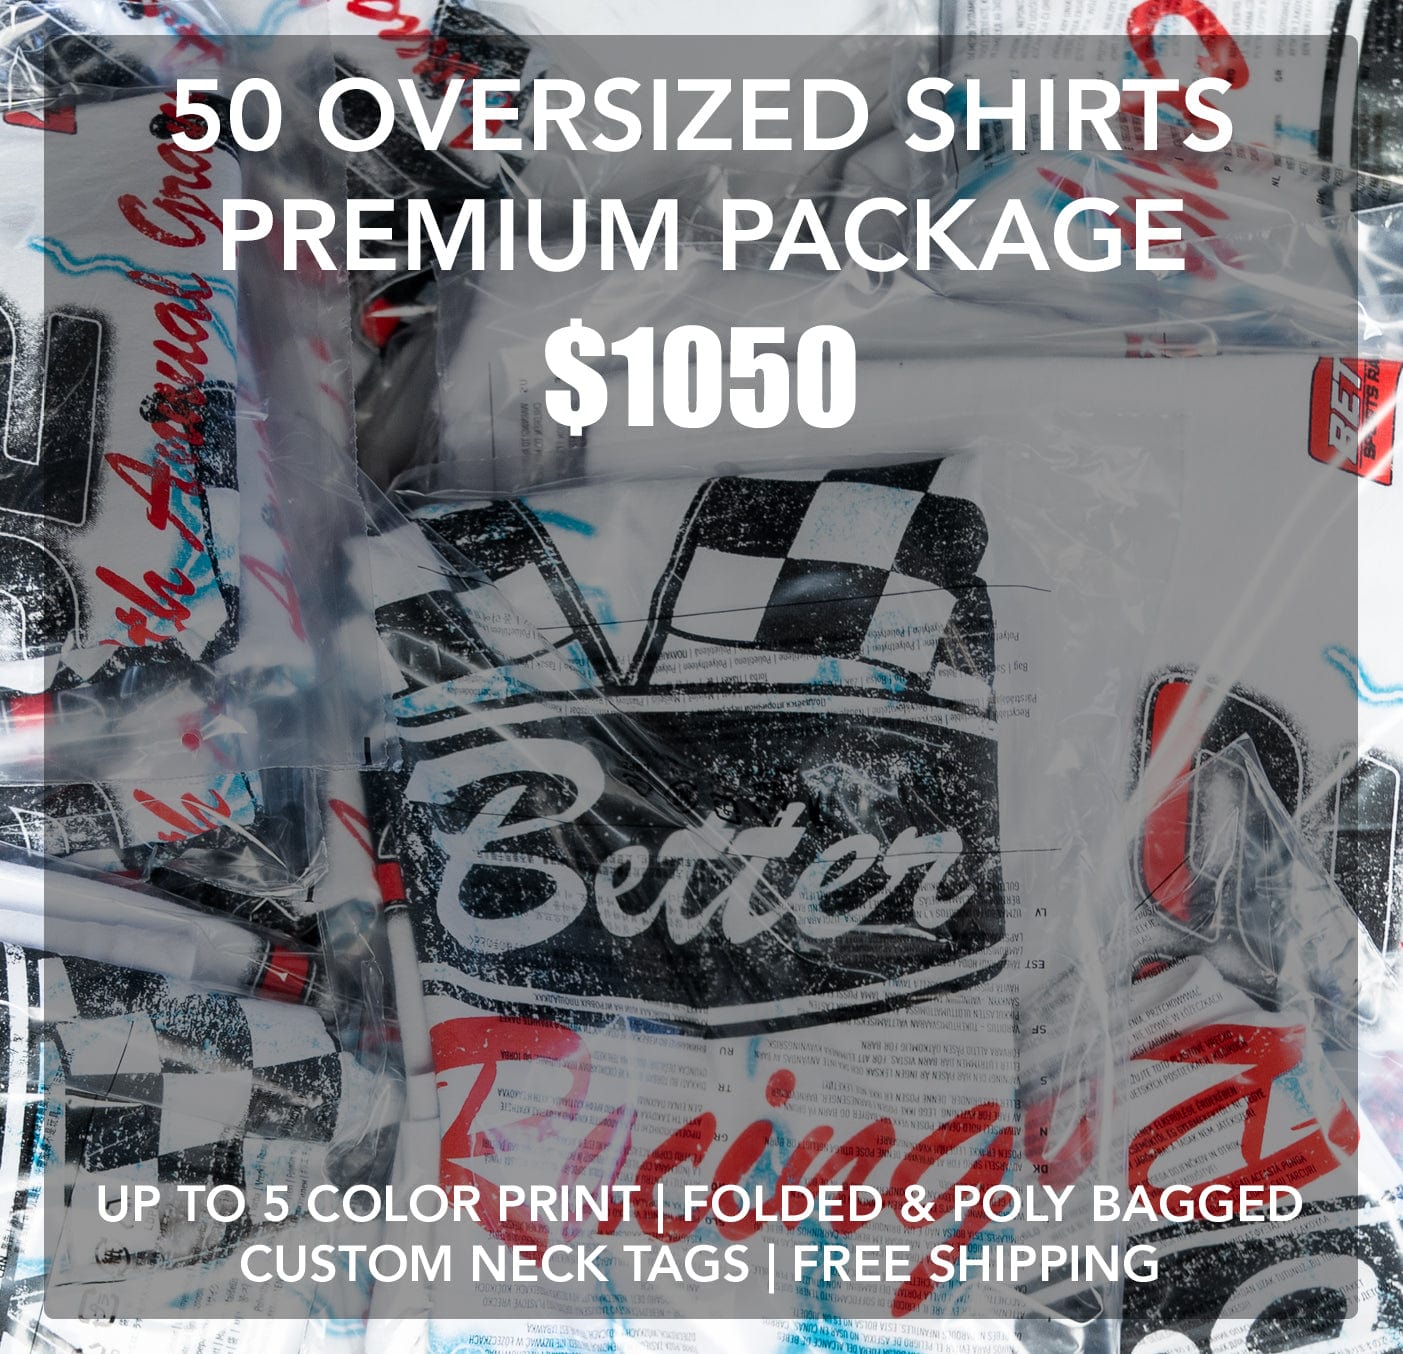 50 Oversized Shirts Premium Package Deal